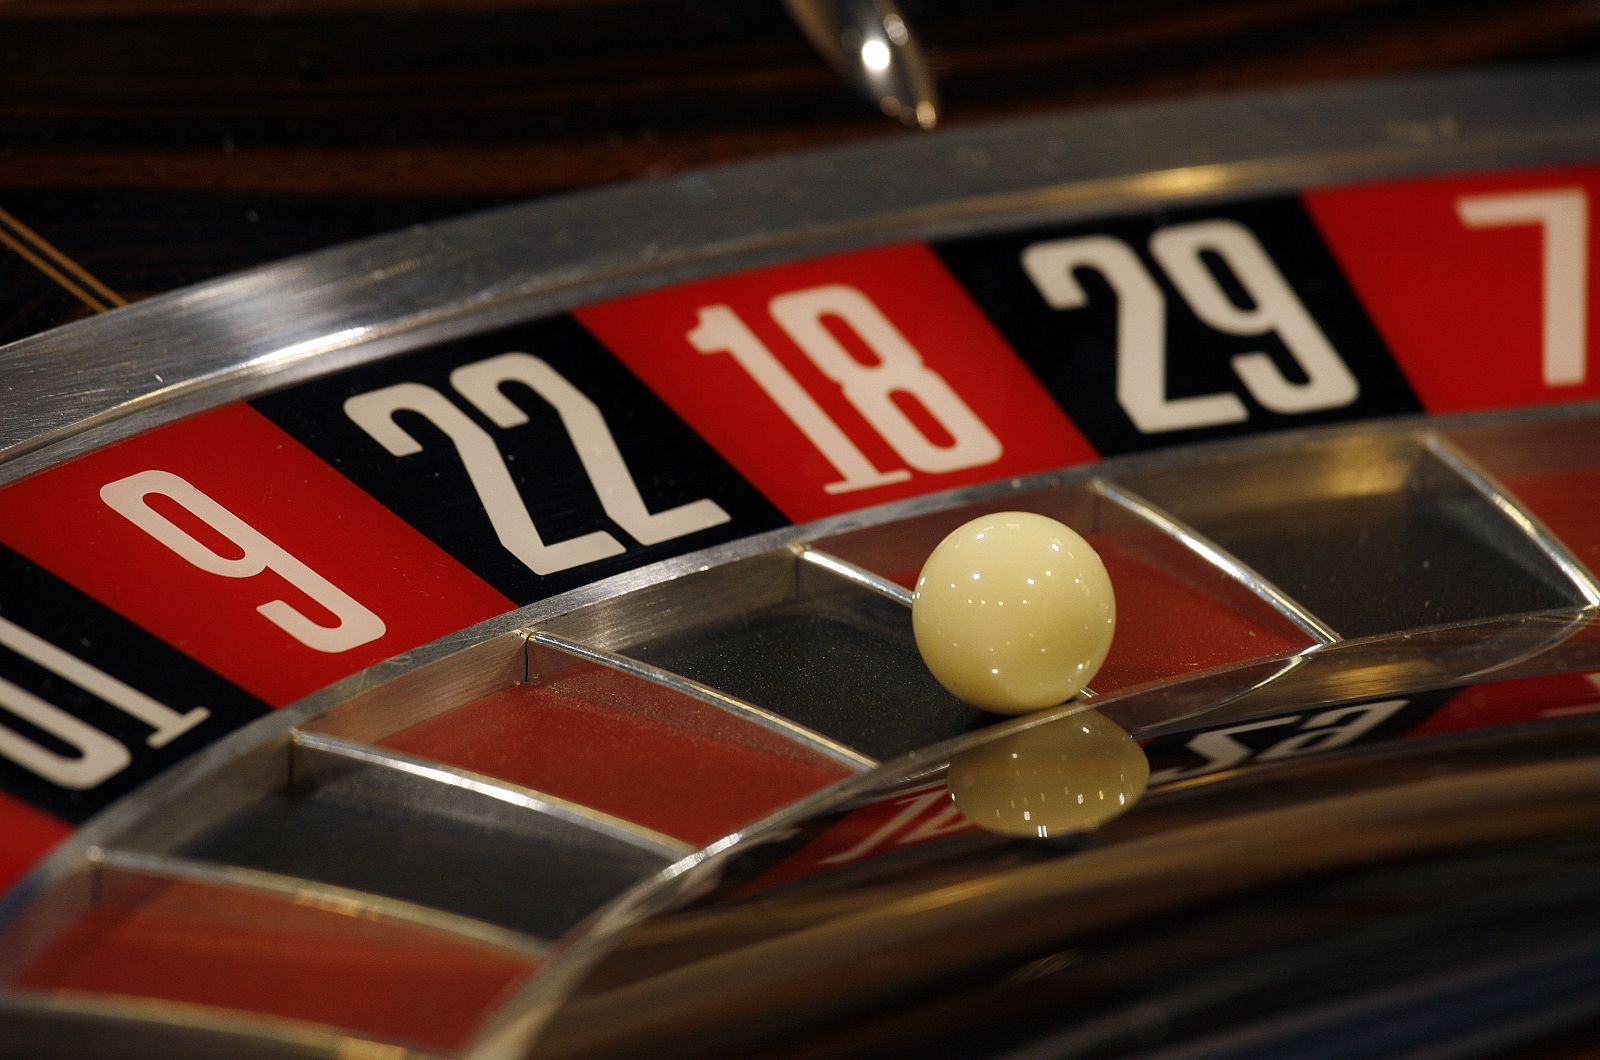 A roulette table is displayed during the Global Gaming Expo Asia in Macau